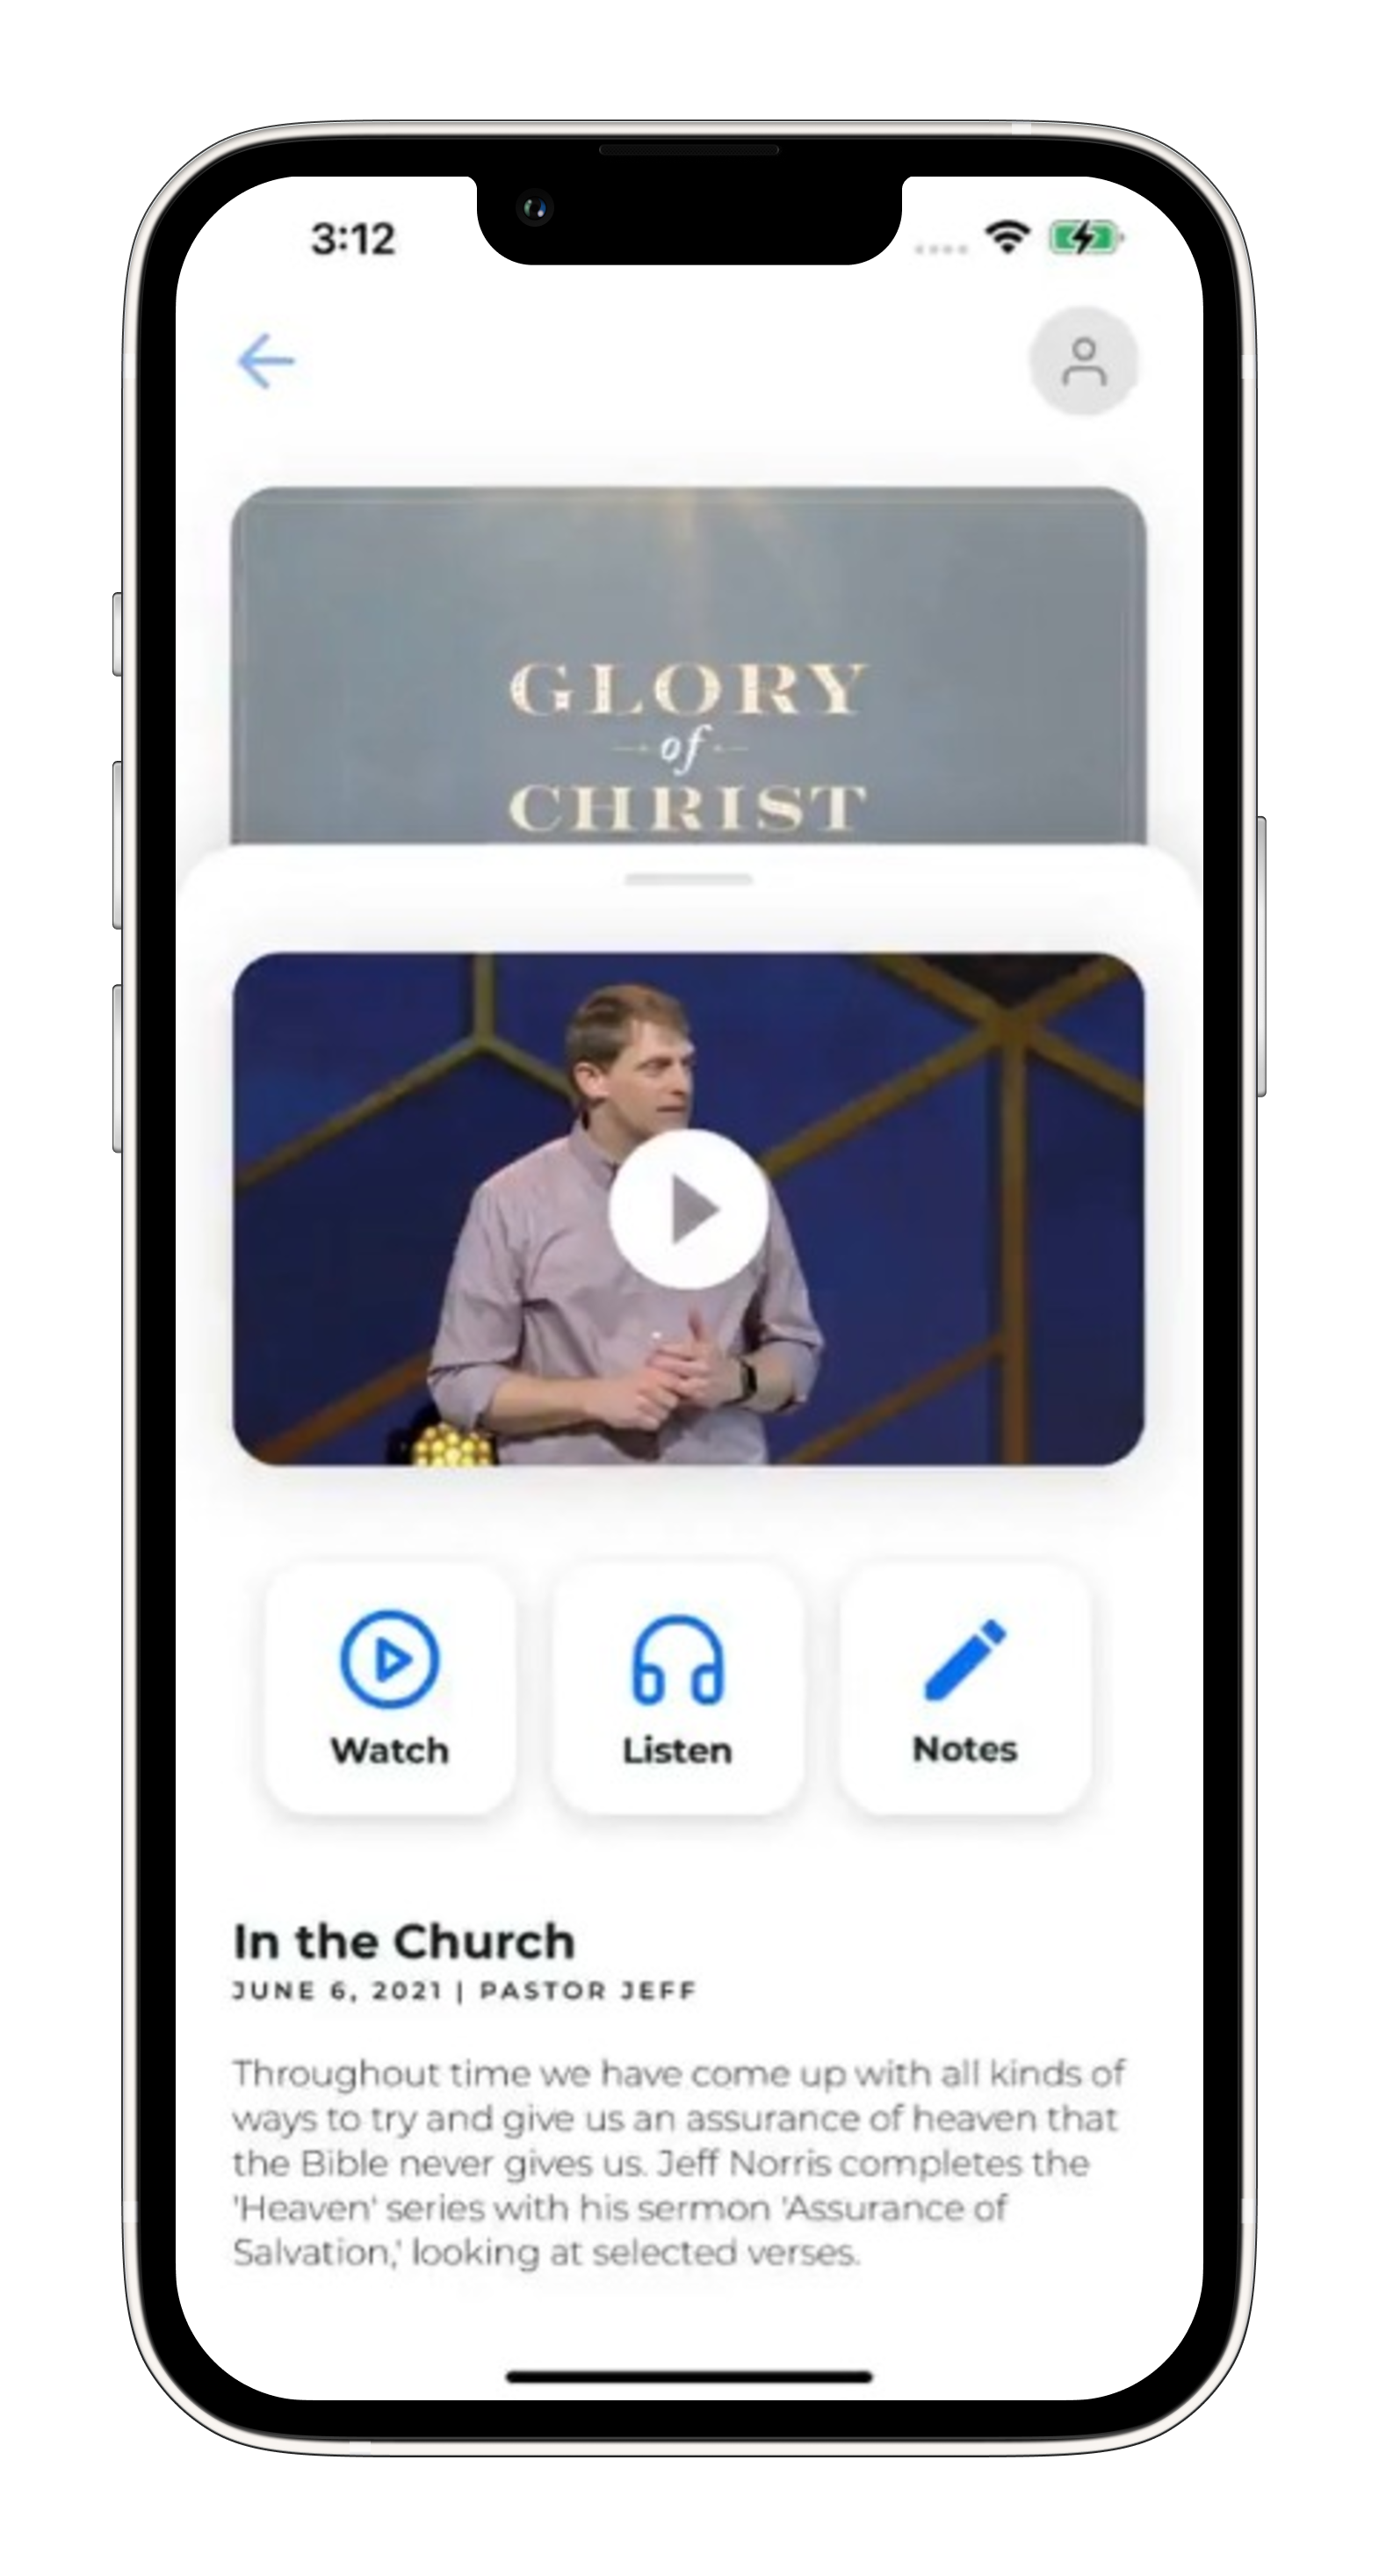 Image displaying the Sermon Player, with the church name, a video of the sermon, options to watch, listen, or take notes, and a brief synopsis of the sermon.